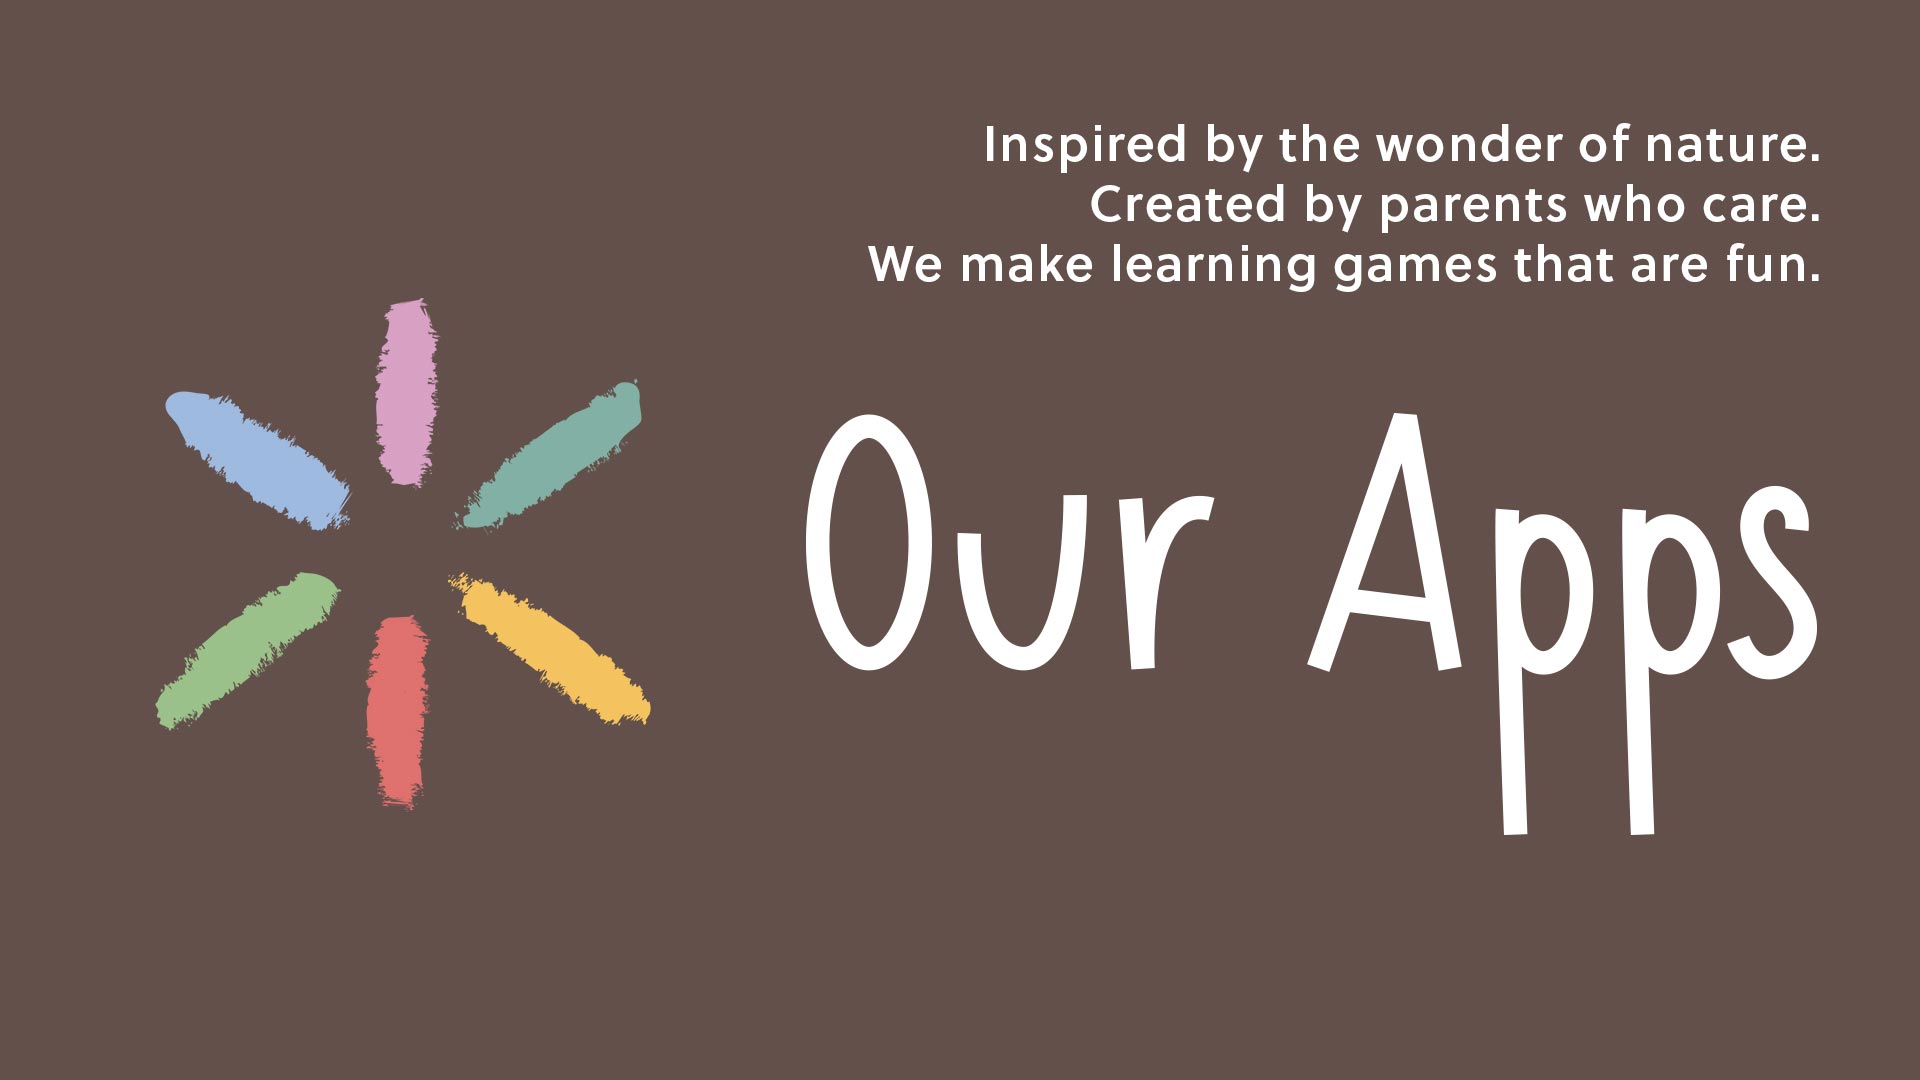 Our Apps - Inspired by the wonder of nature. Created by parents who care. We make learning games that are fun.